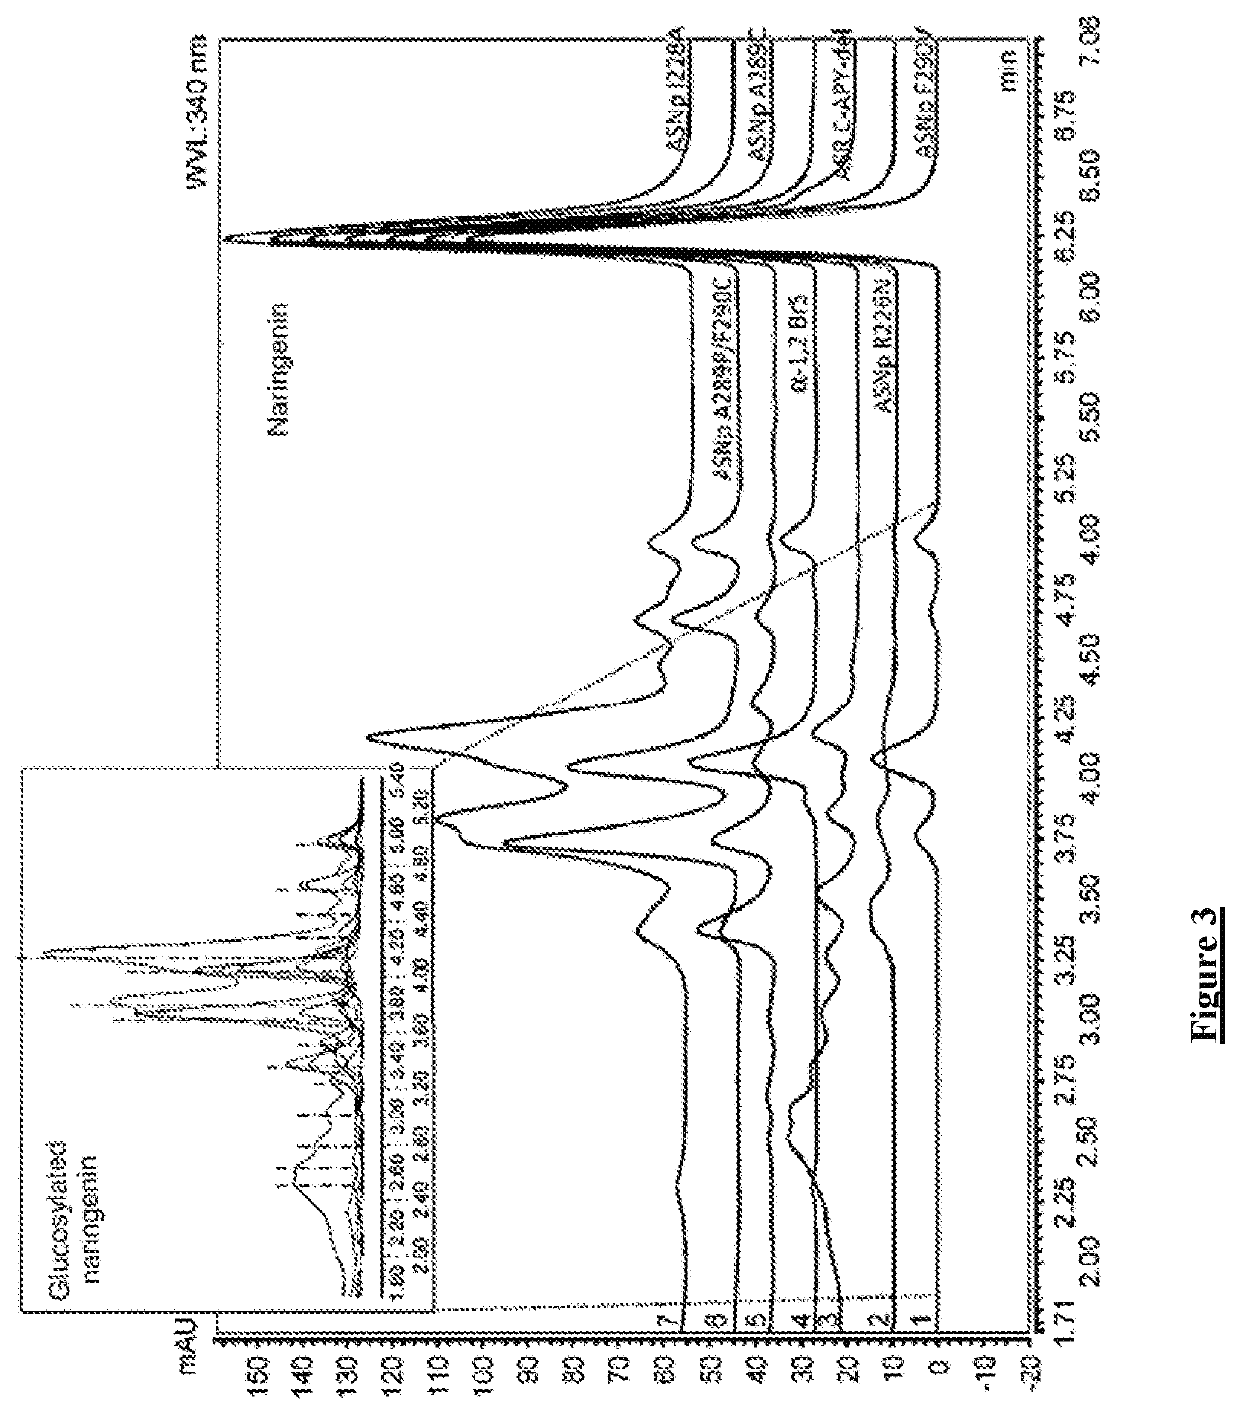 Flavonoids O-A-glucosylated on the B cycle, method for the production thereof and uses